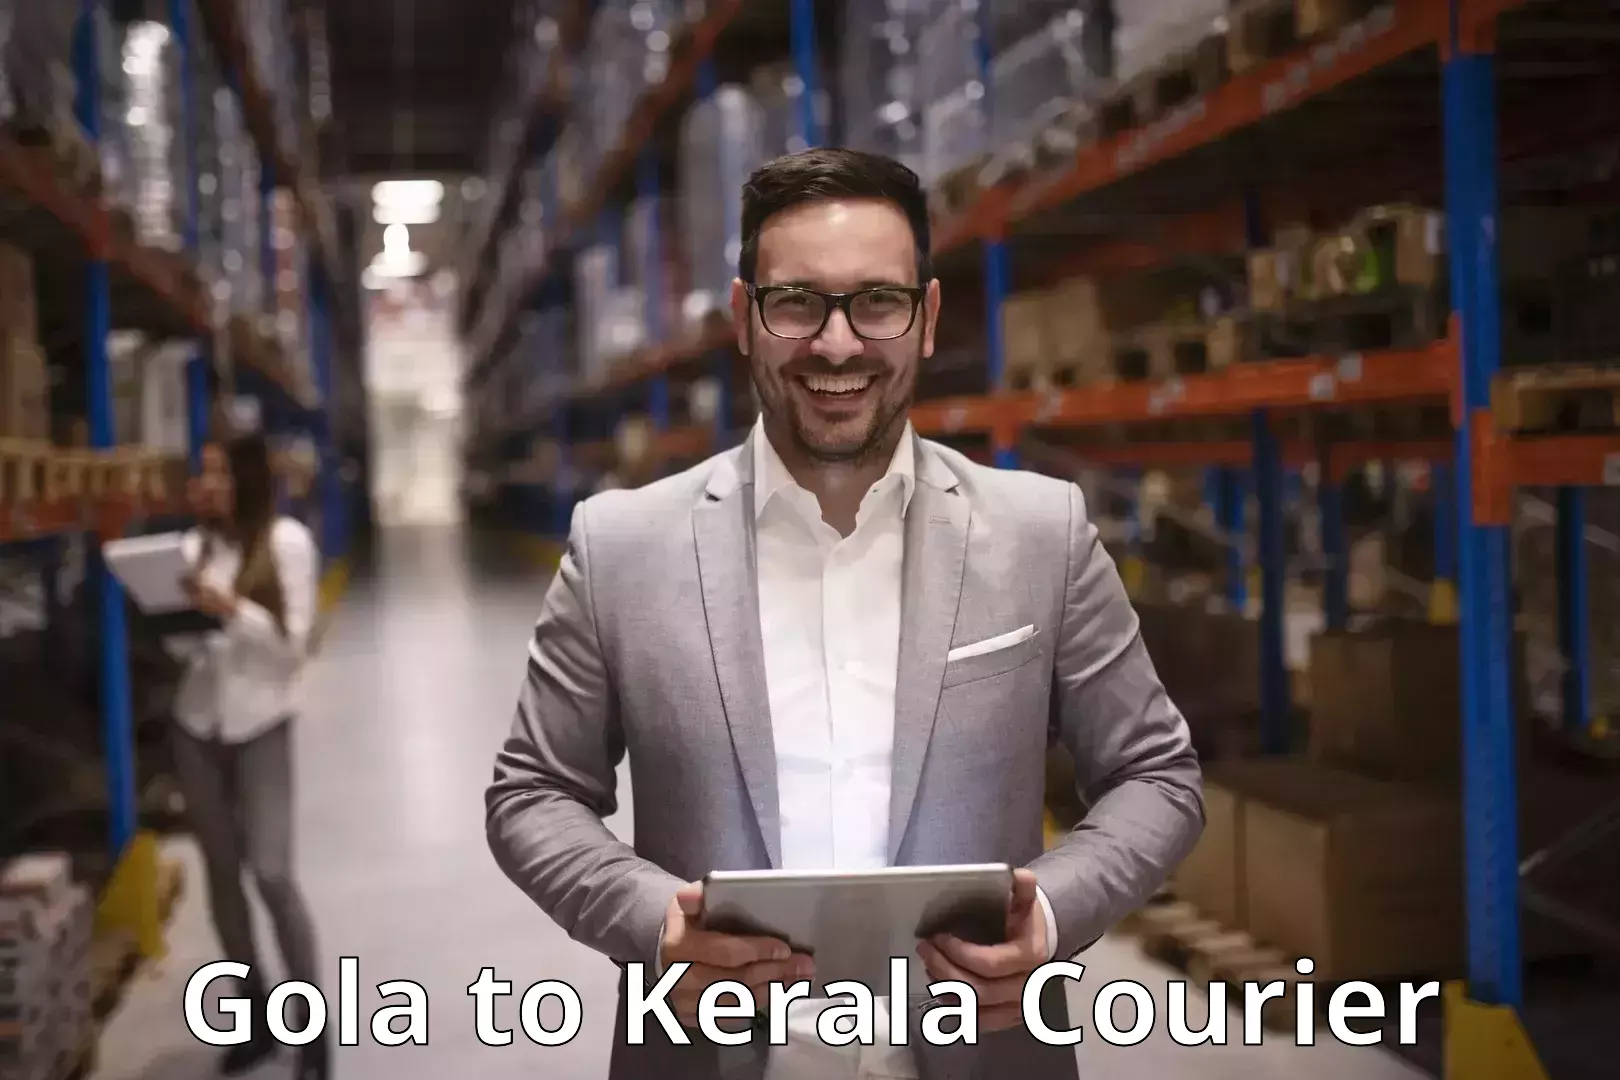 Professional courier handling Gola to Thrissur